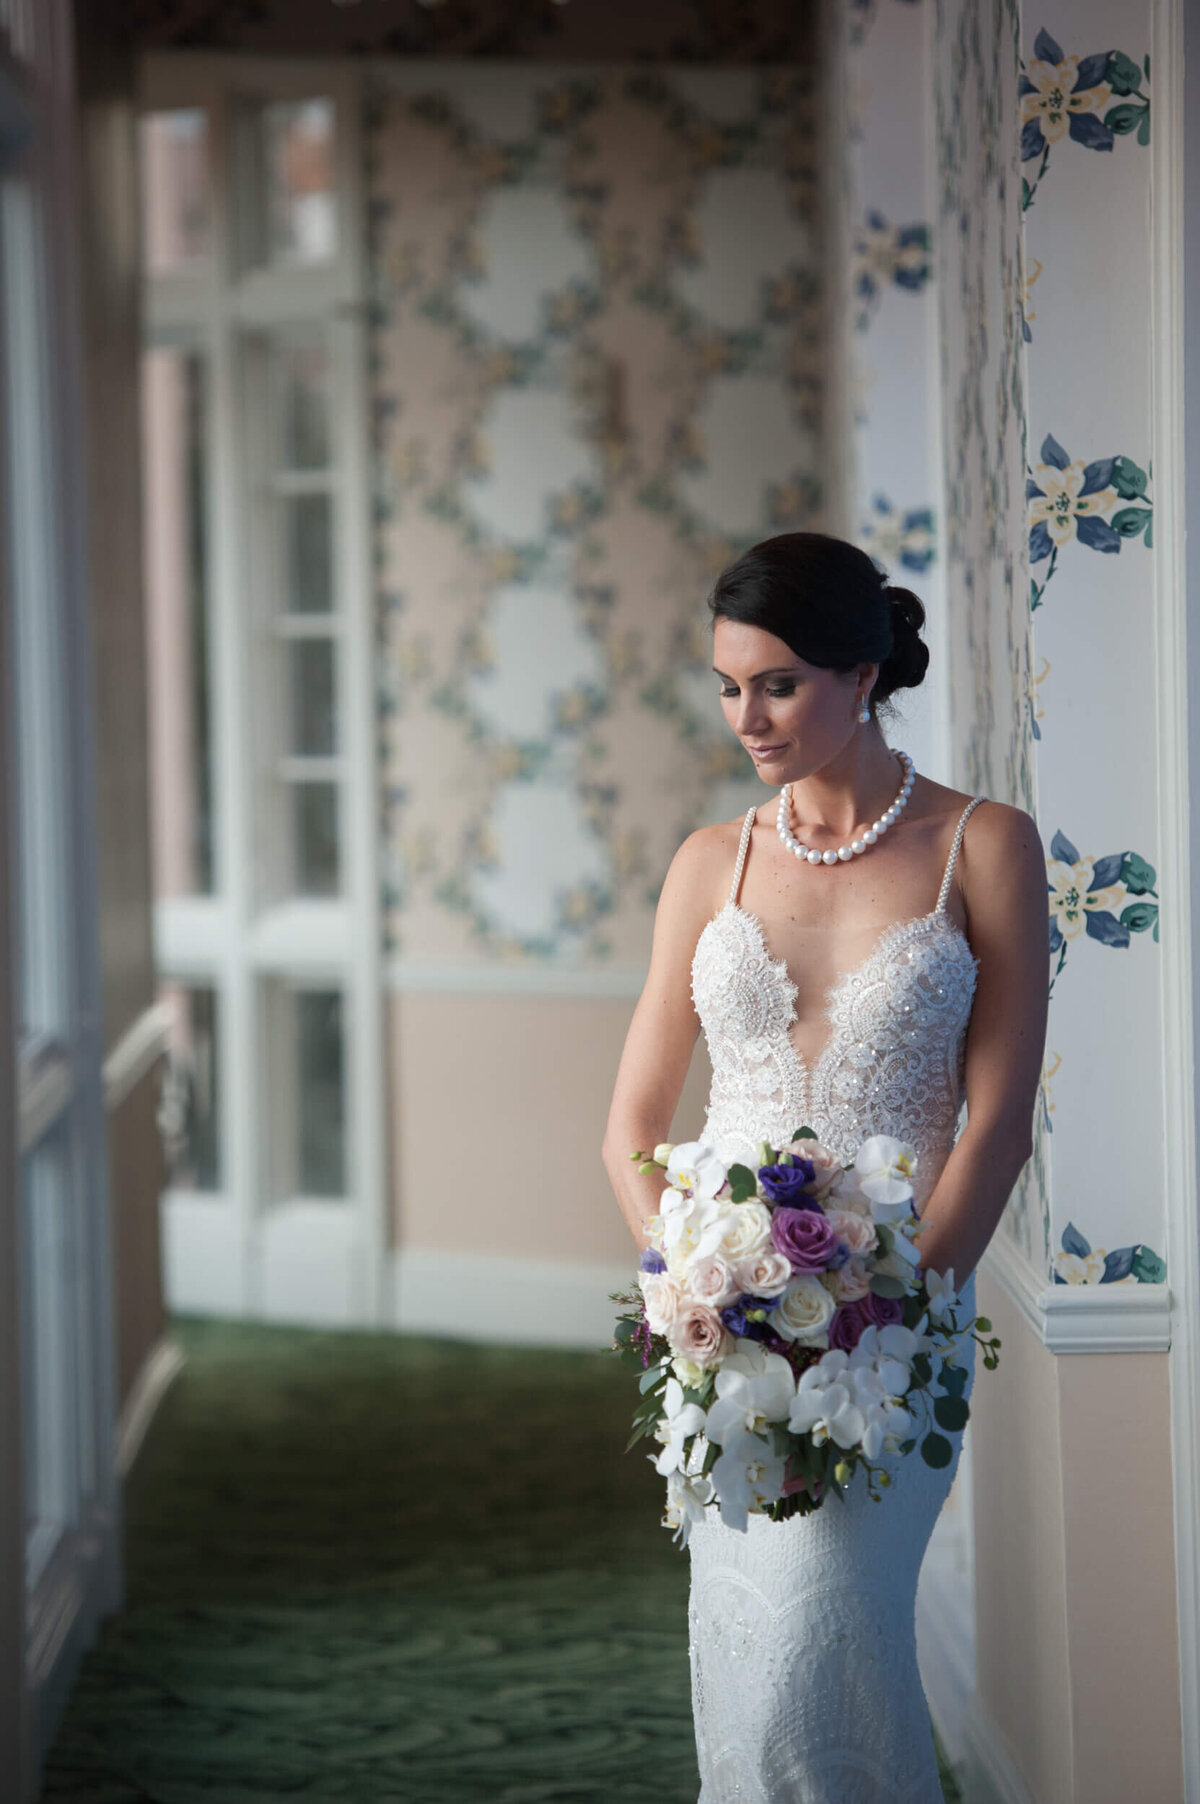 Bride leading against the wall in a beautiful hallway at the Broadmoor Hotel in Colorado Springs